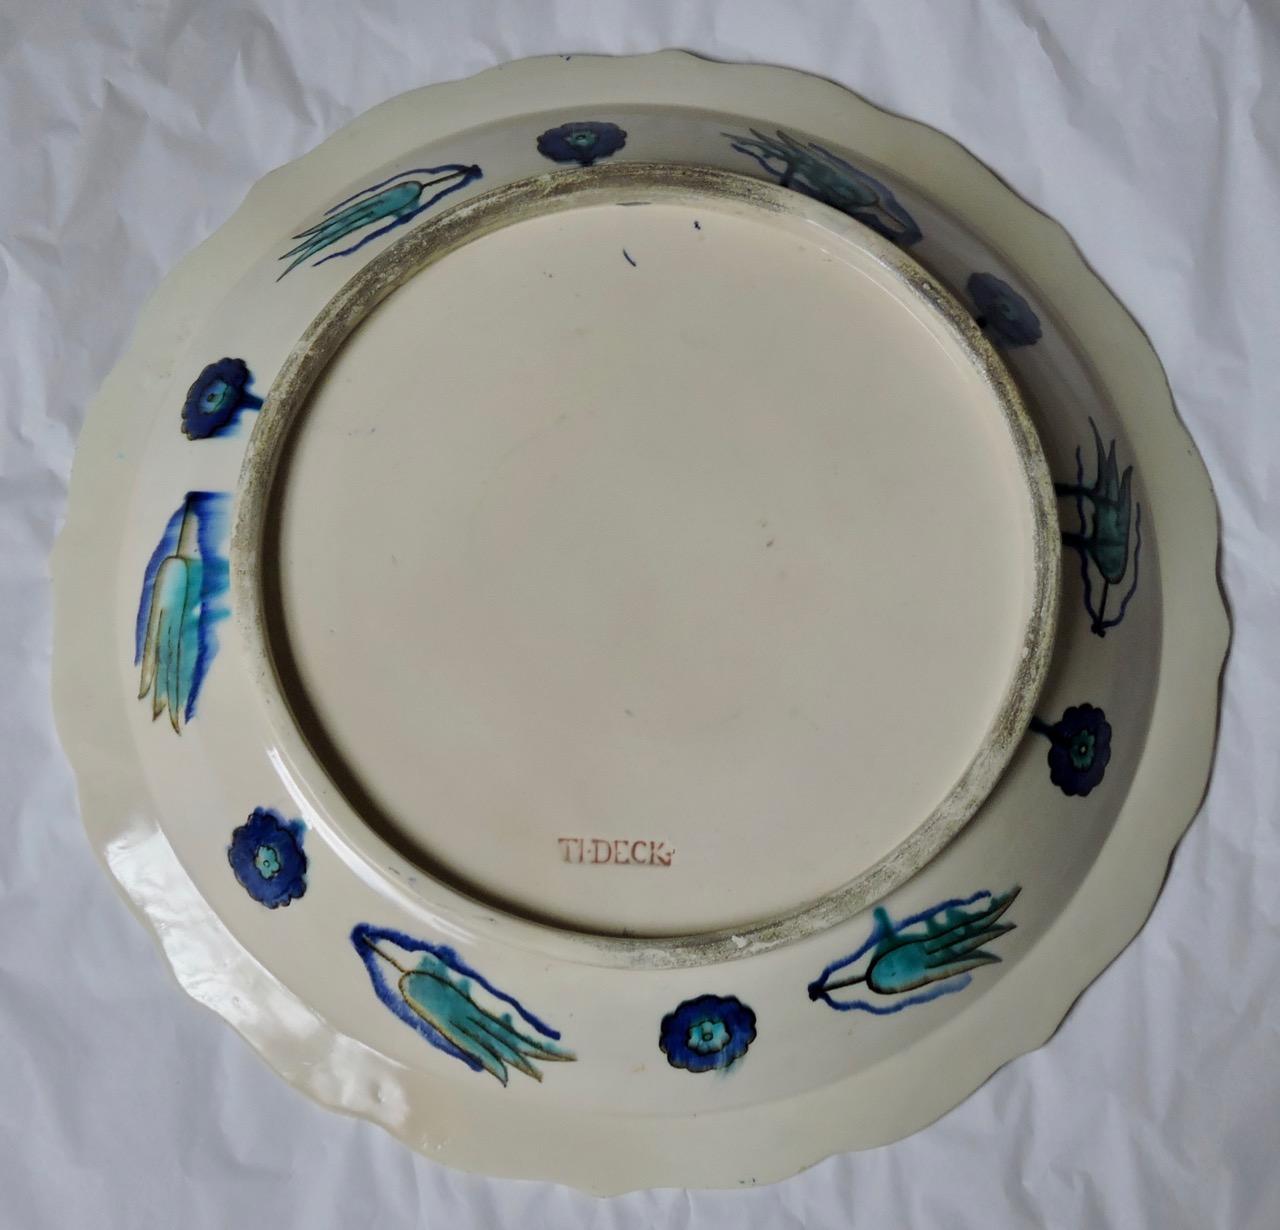 Théodore Deck, a Fretted Enameled Faience Impressive Iznik Charger 4